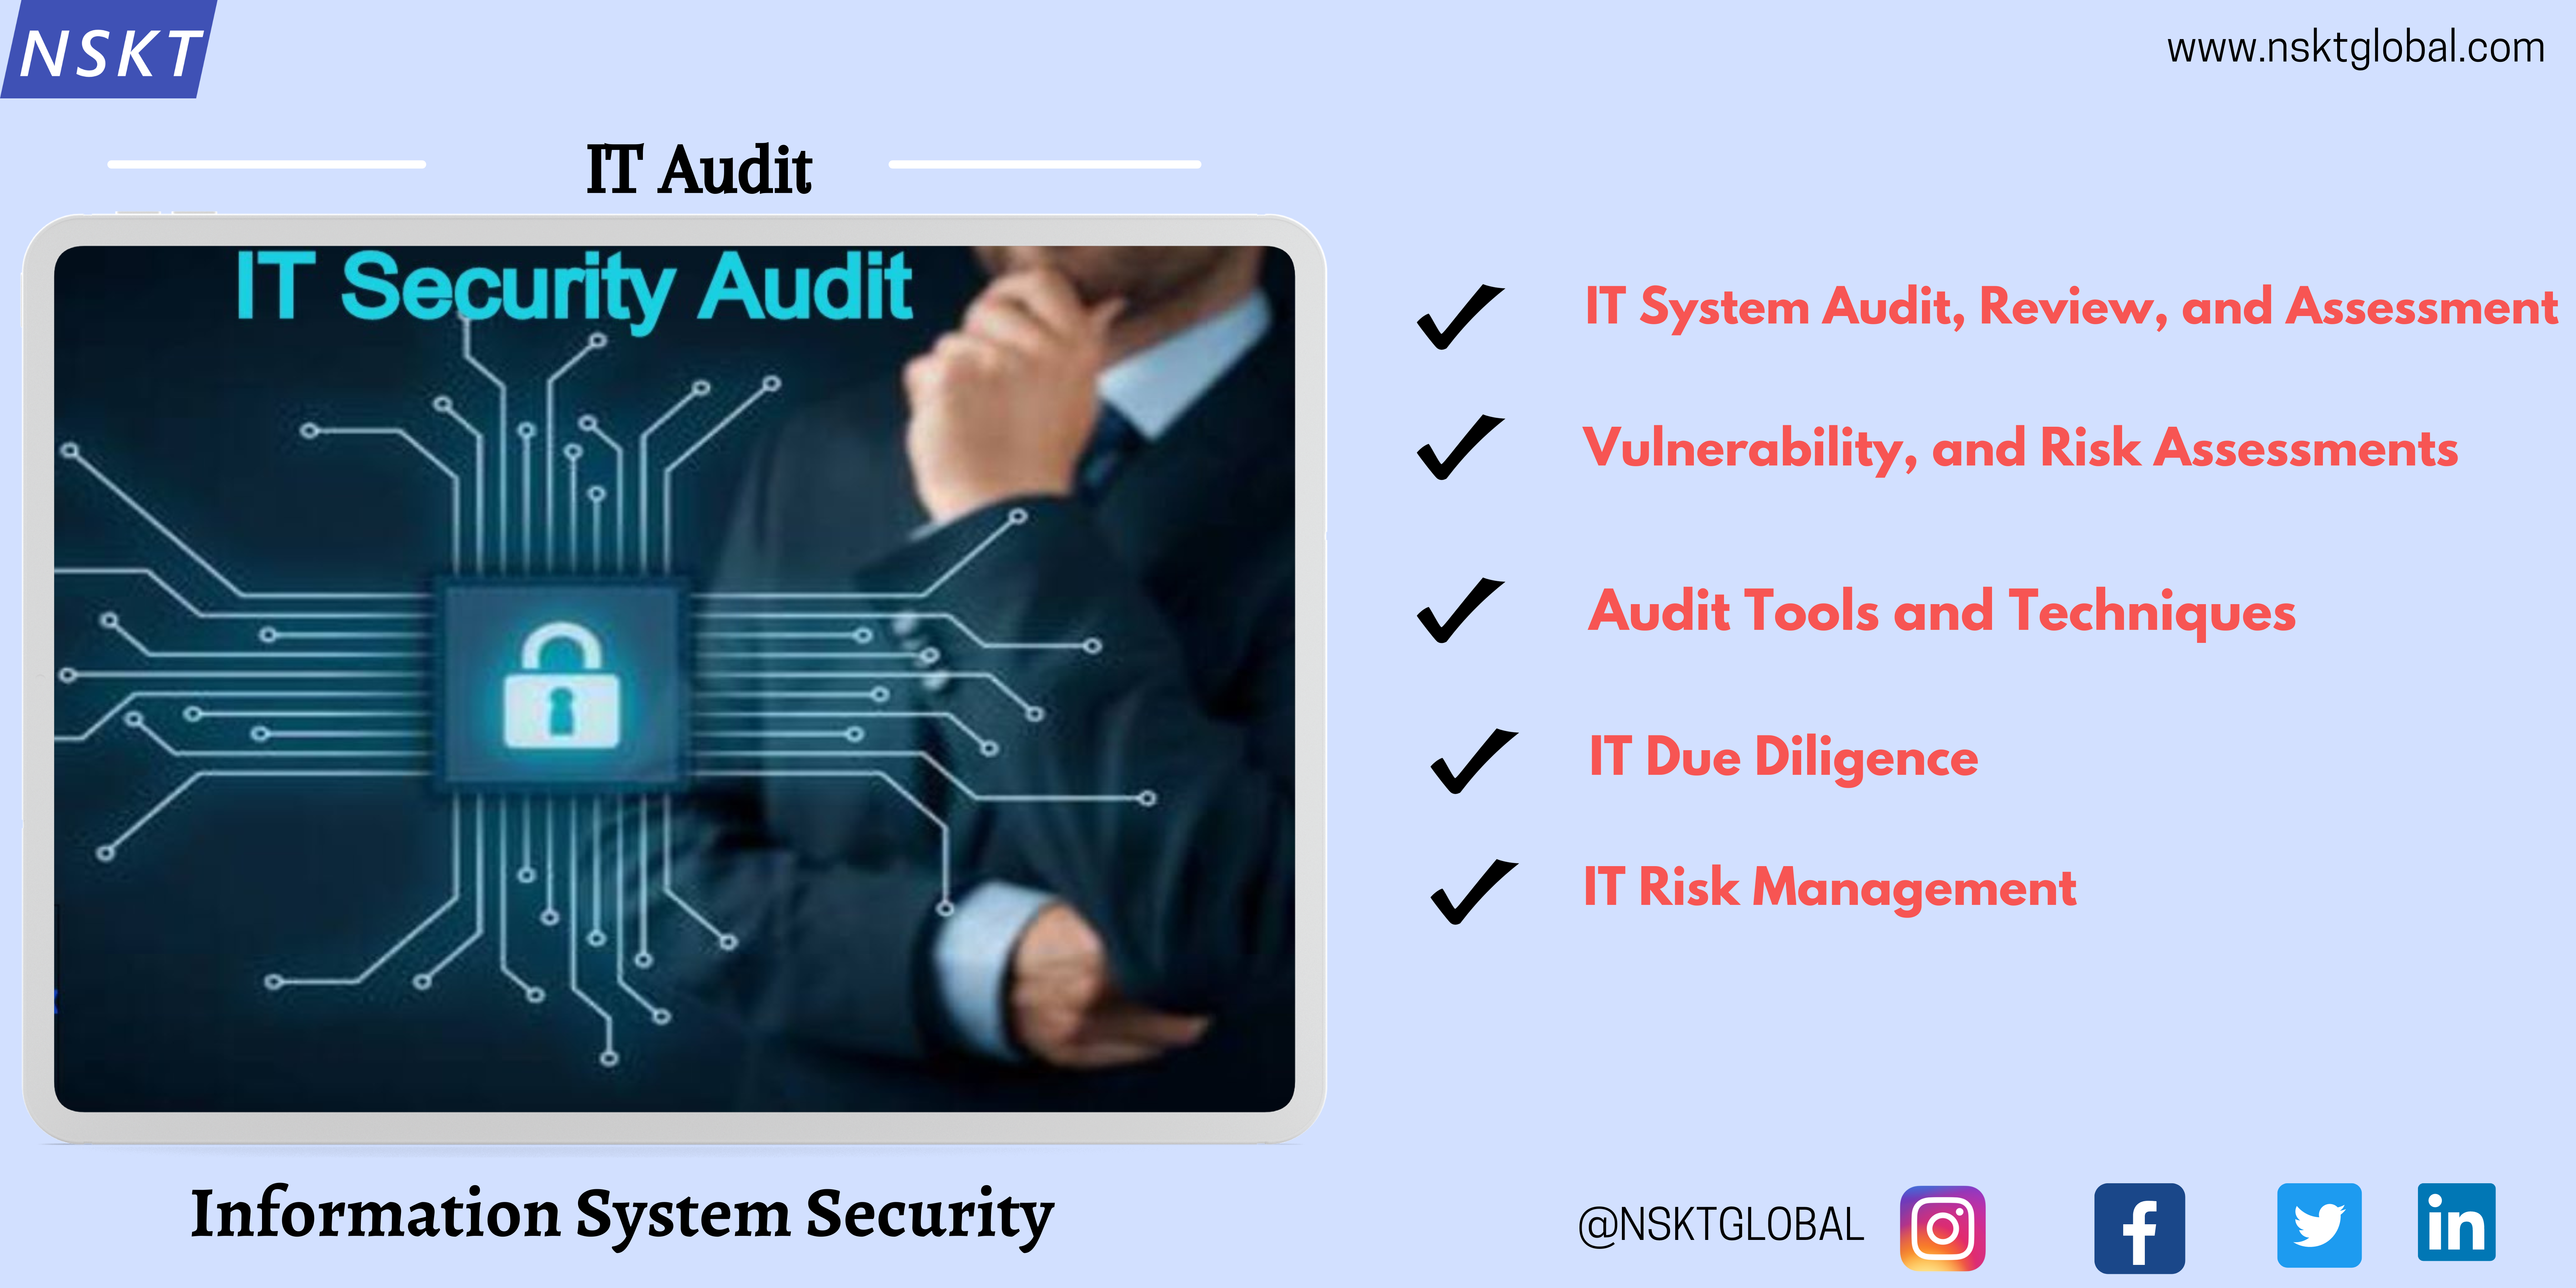 IT Audit and Information System Security